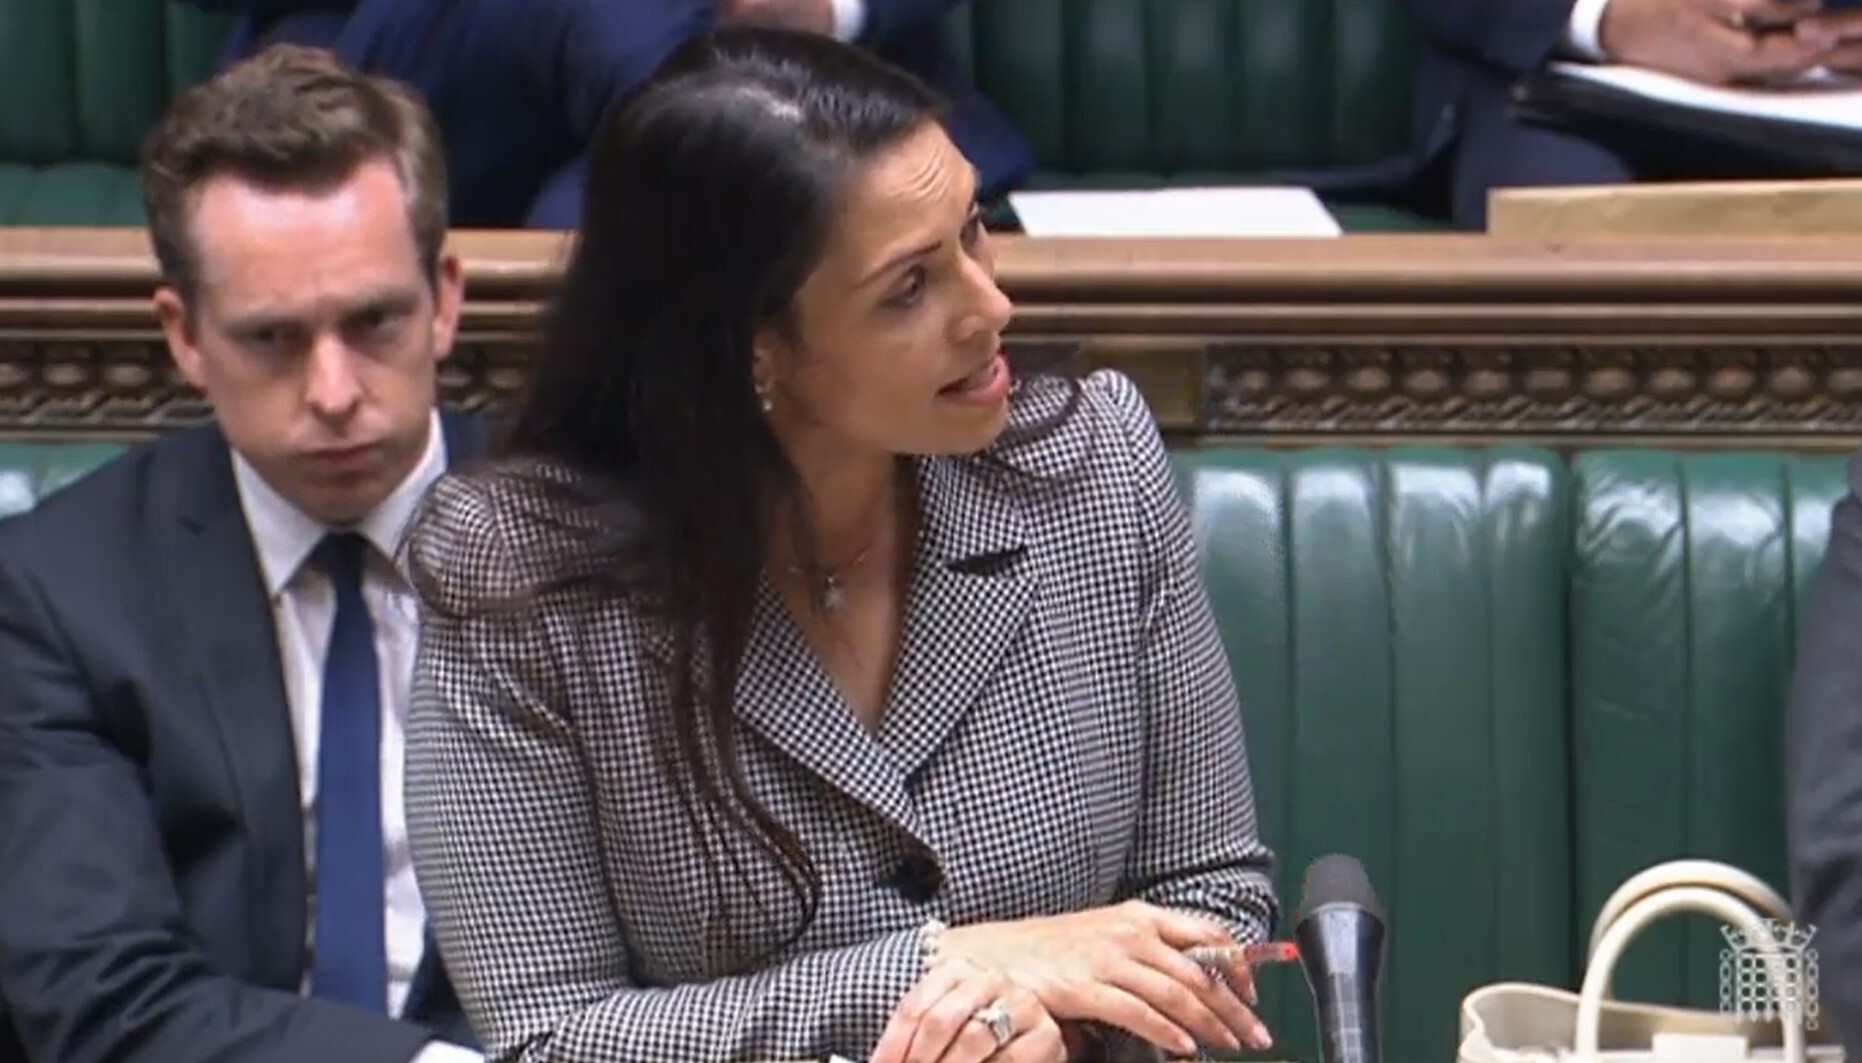 Watch: MP refuses to withdraw comments after Priti Patel called it a ‘slur’